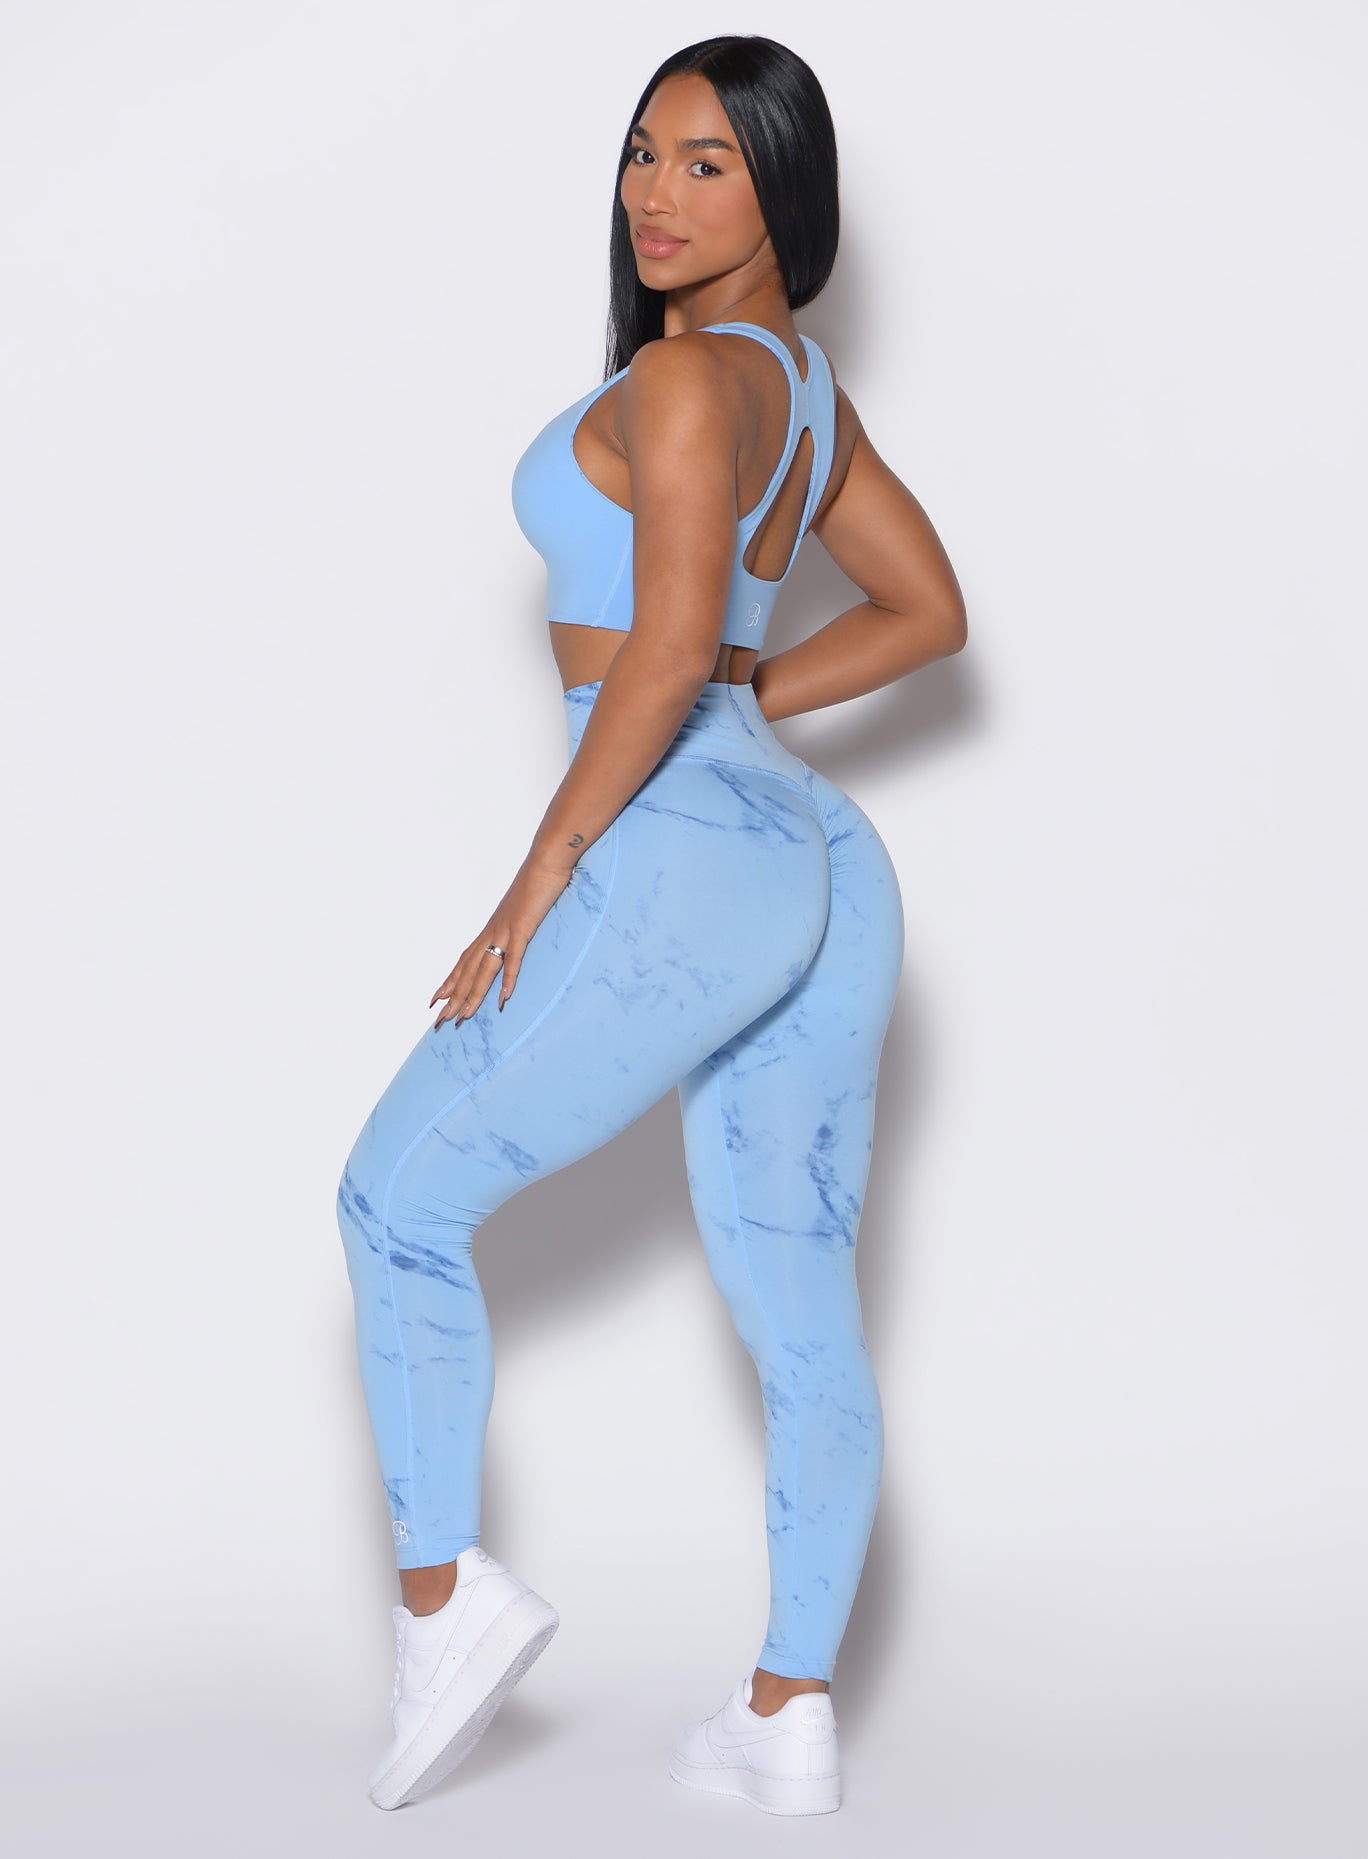 left side profile view of a model wearing our fit marble leggings in Blue Jay color along with a matching bra 